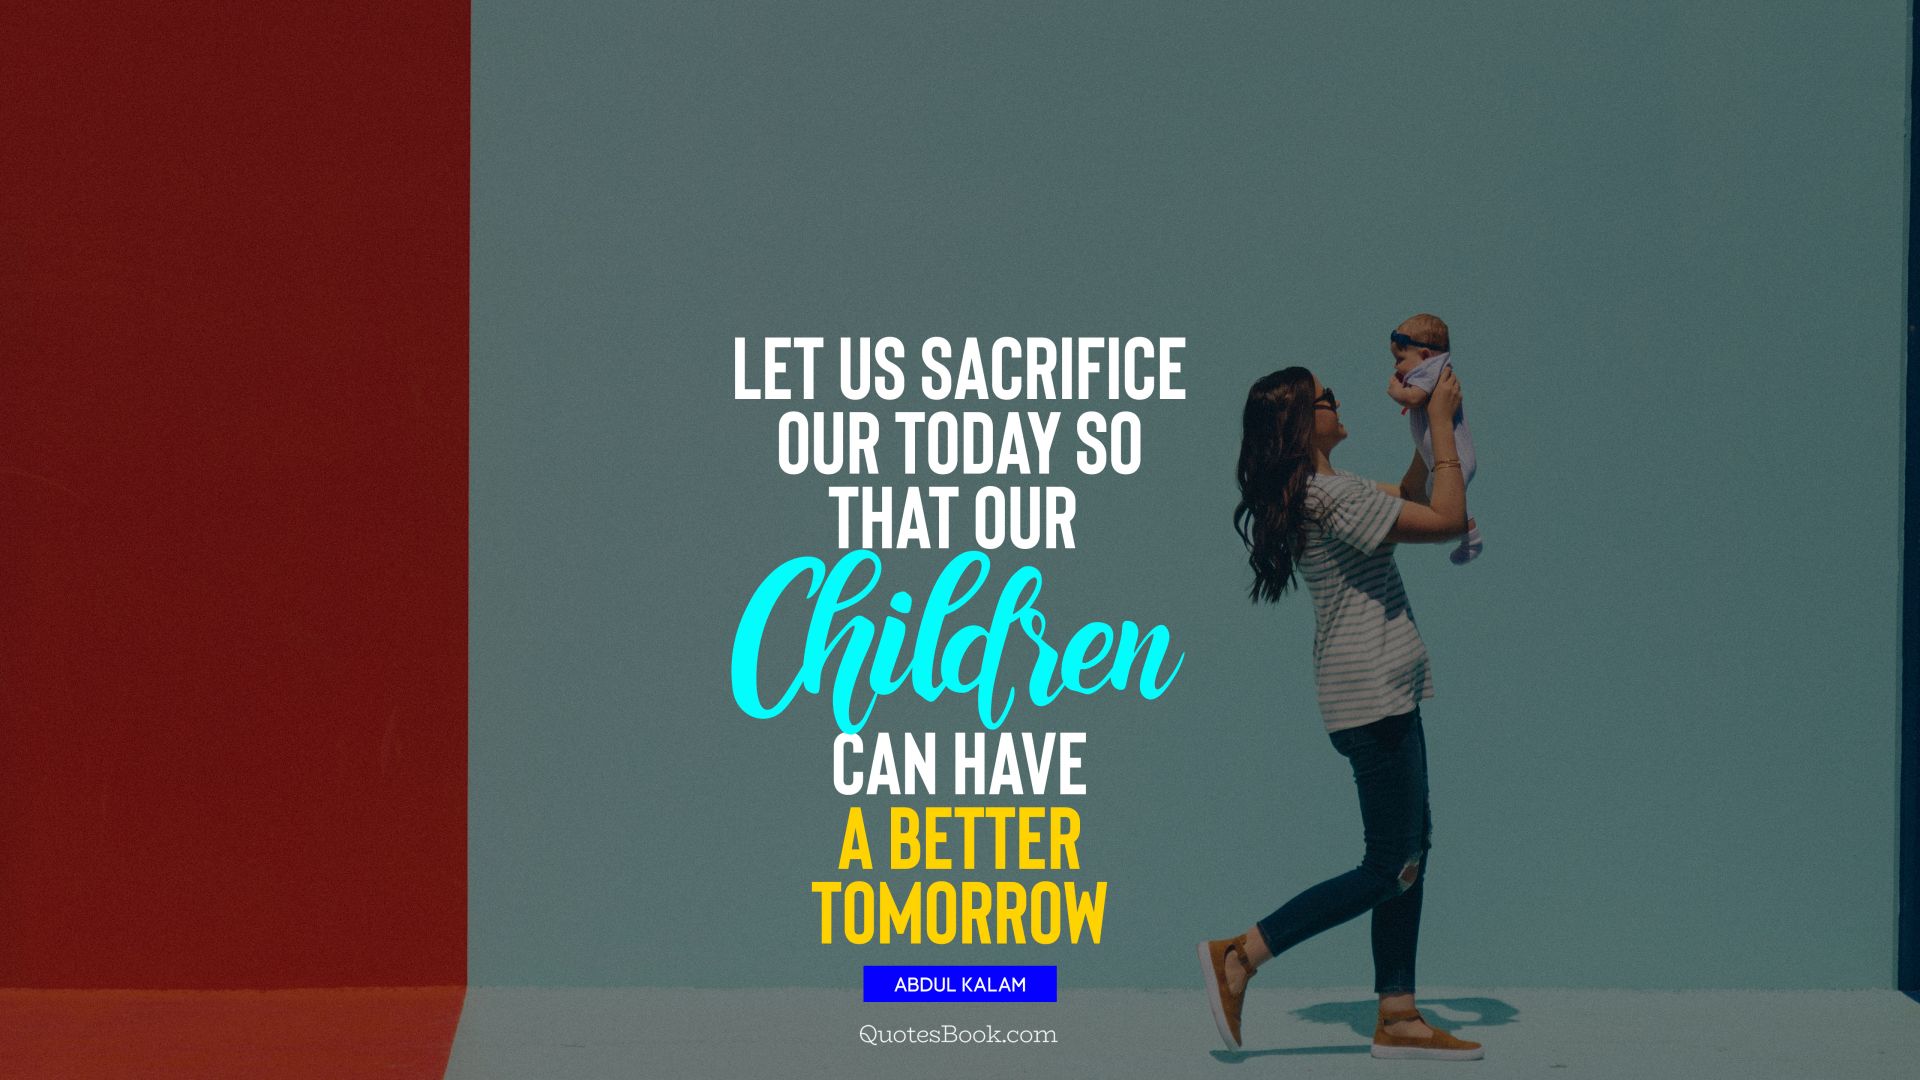 Let us sacrifice our today so that our children can have a better tomorrow. - Quote by Abdul Kalam